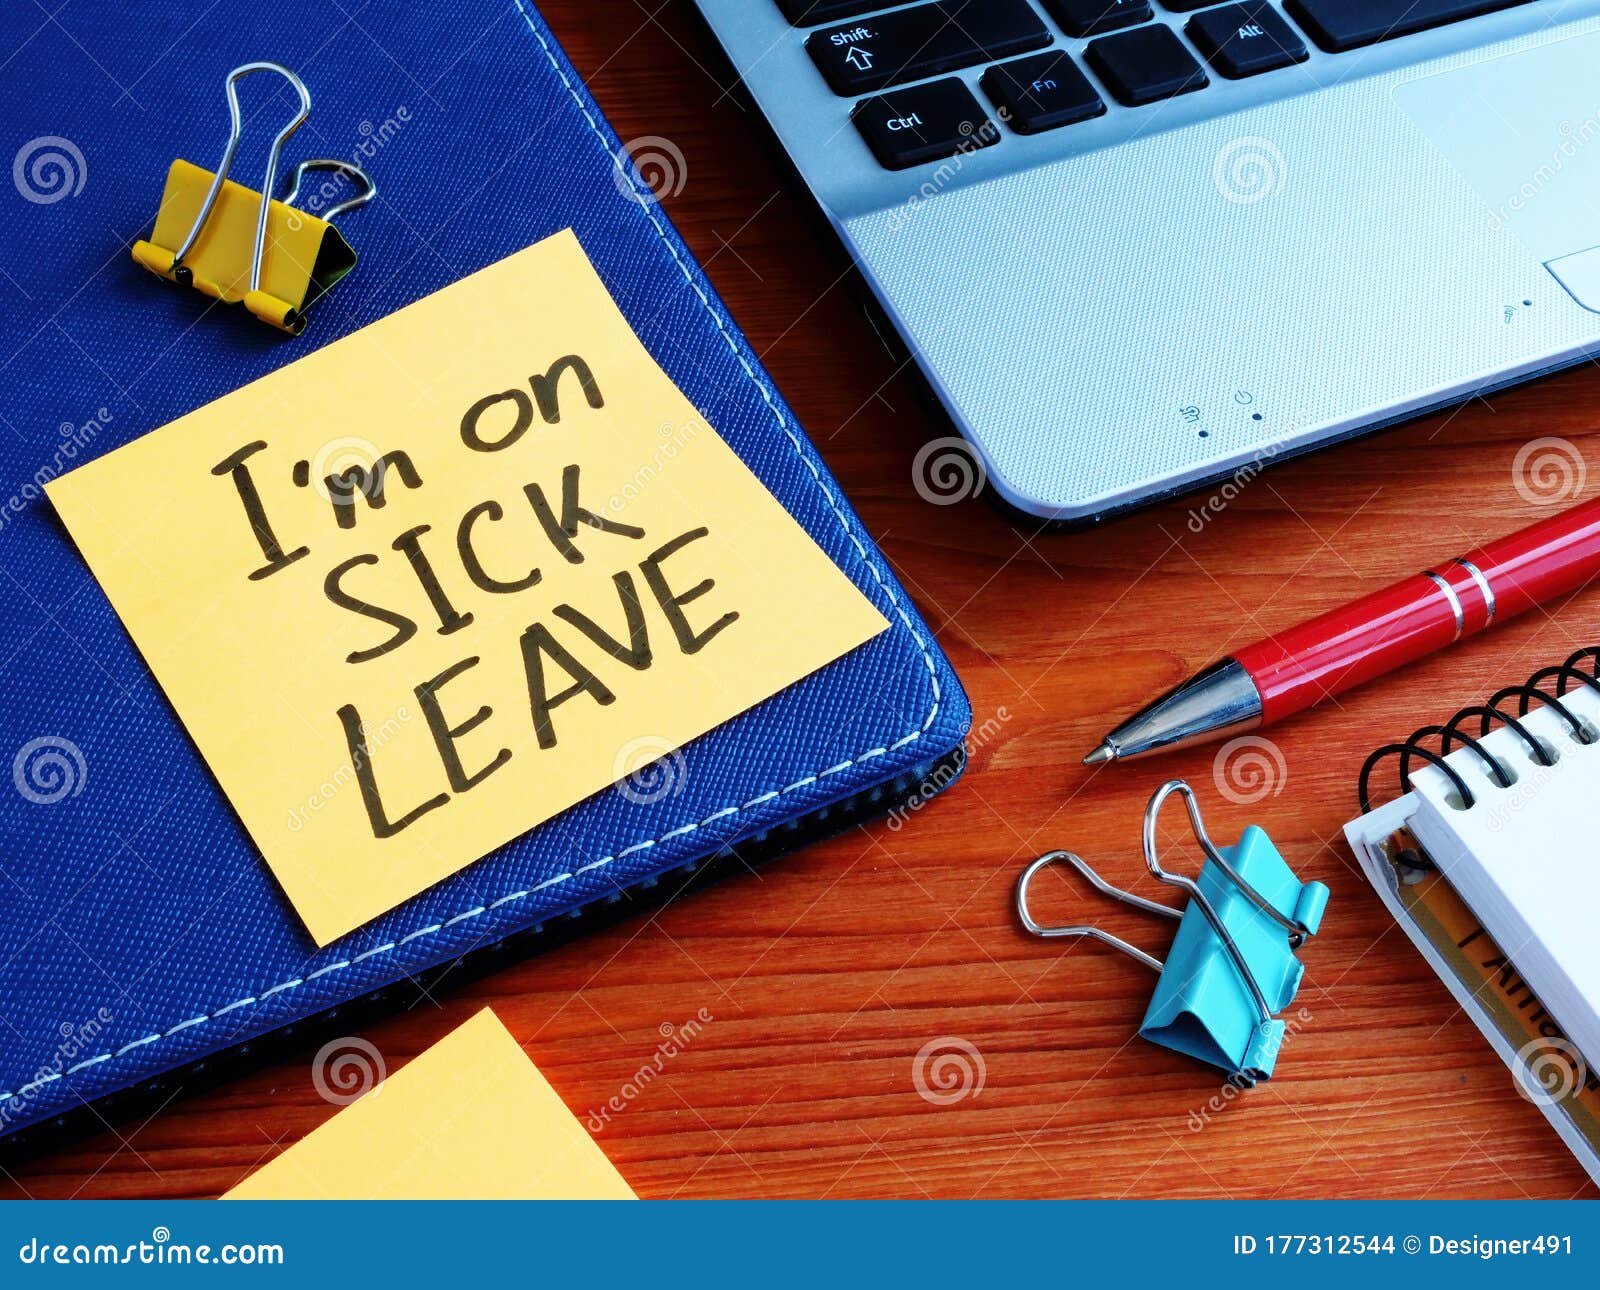 memo stick with message i am on sick leave